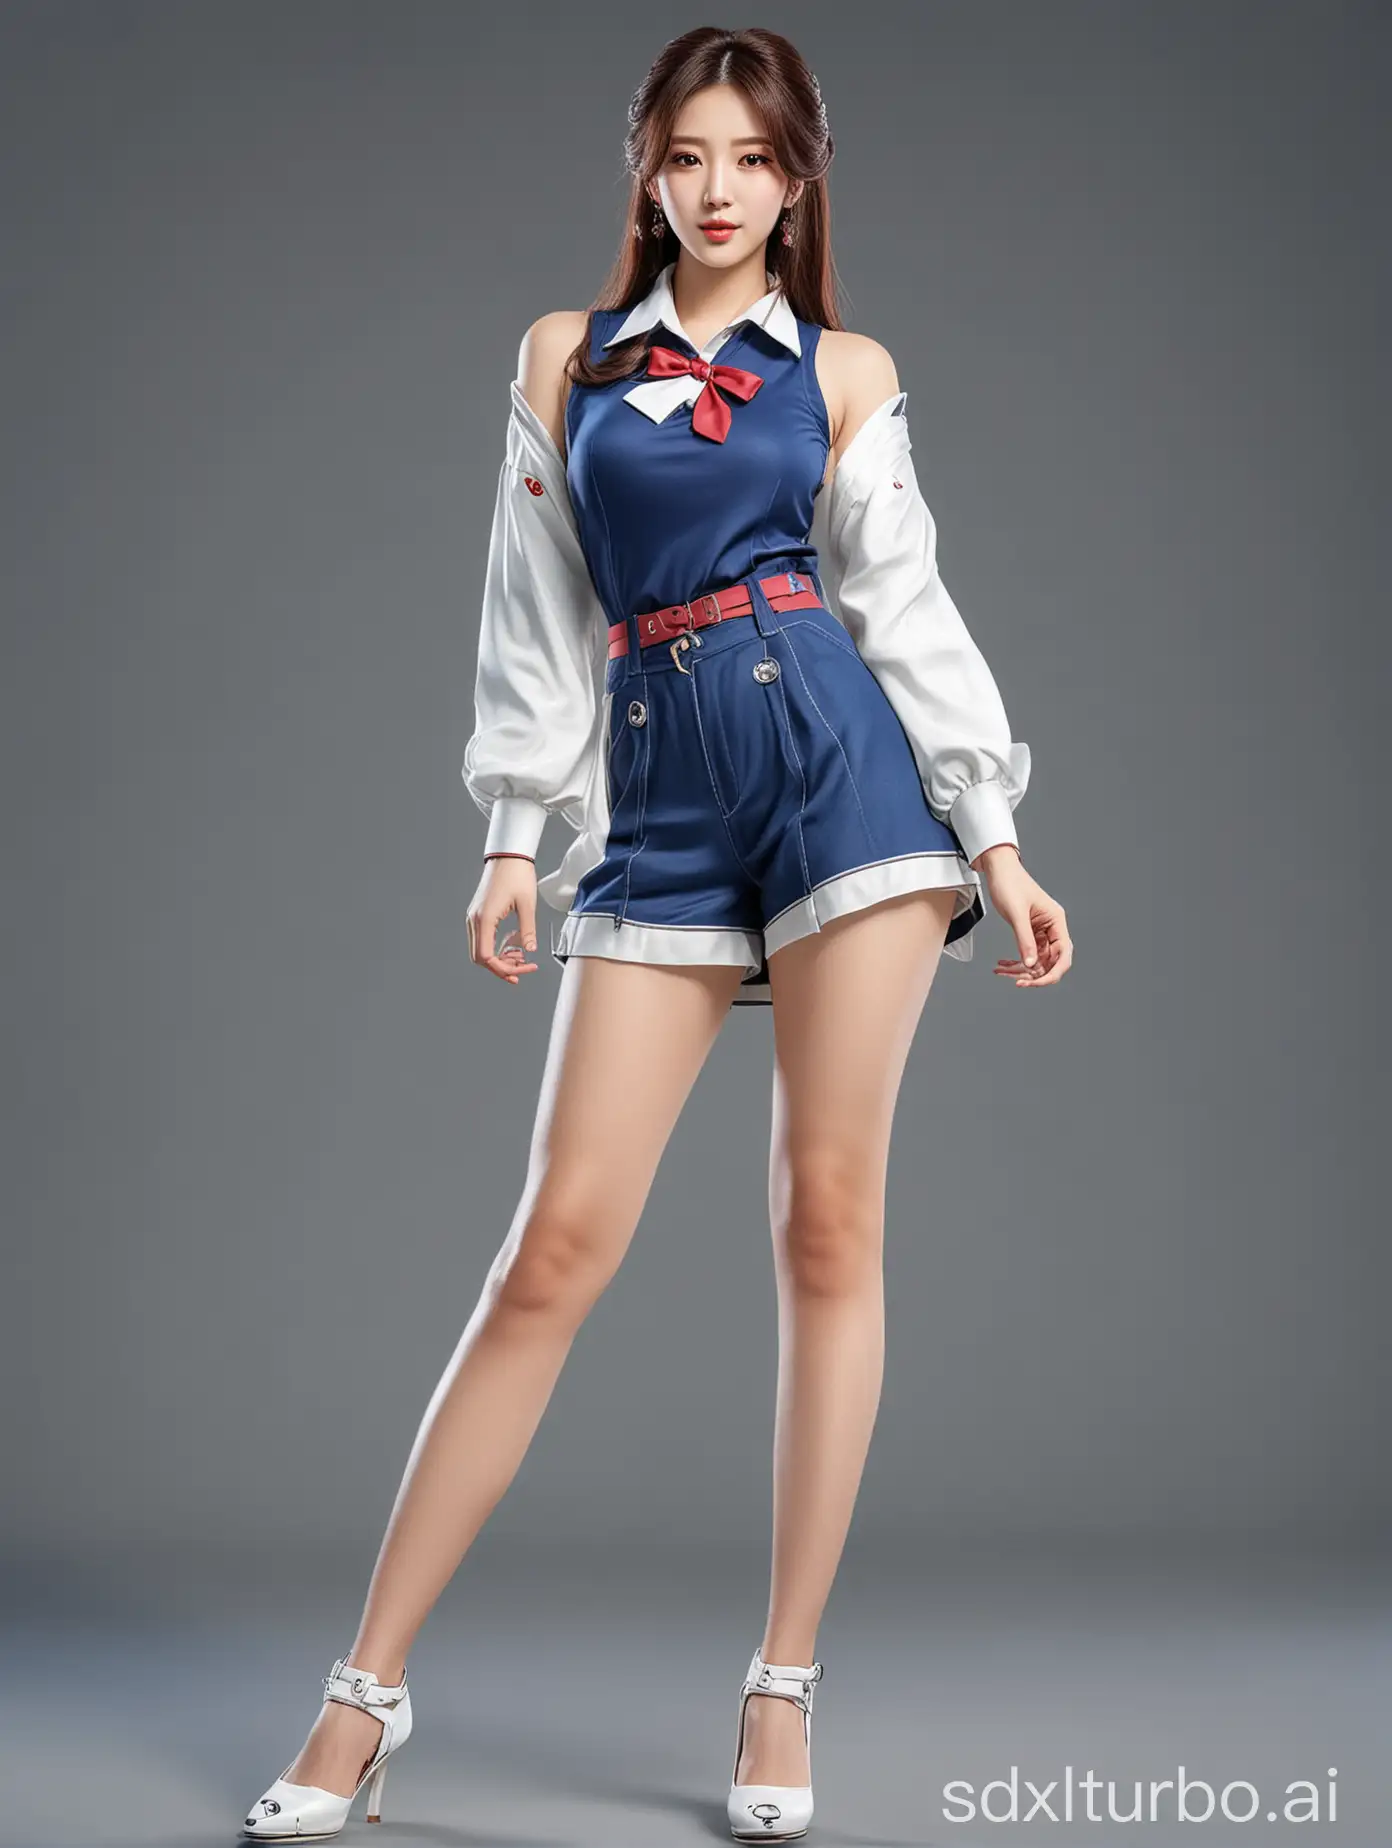 Stylish and charming beautiful woman, video game Korean girl, full body, no background,